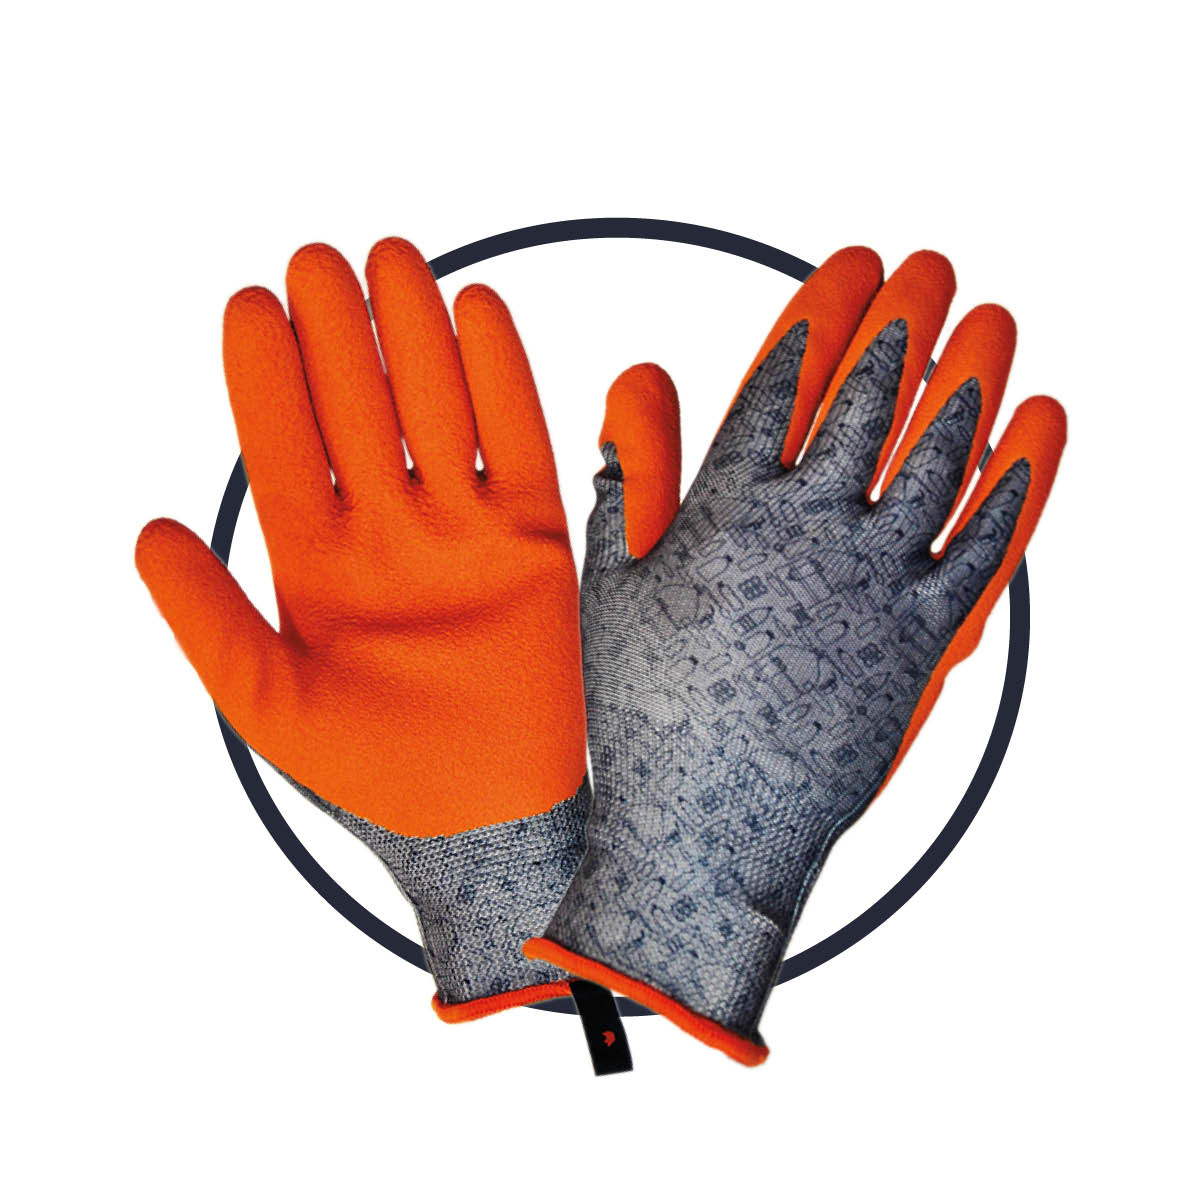 BOTTLE GLOVE - Treadstone Products